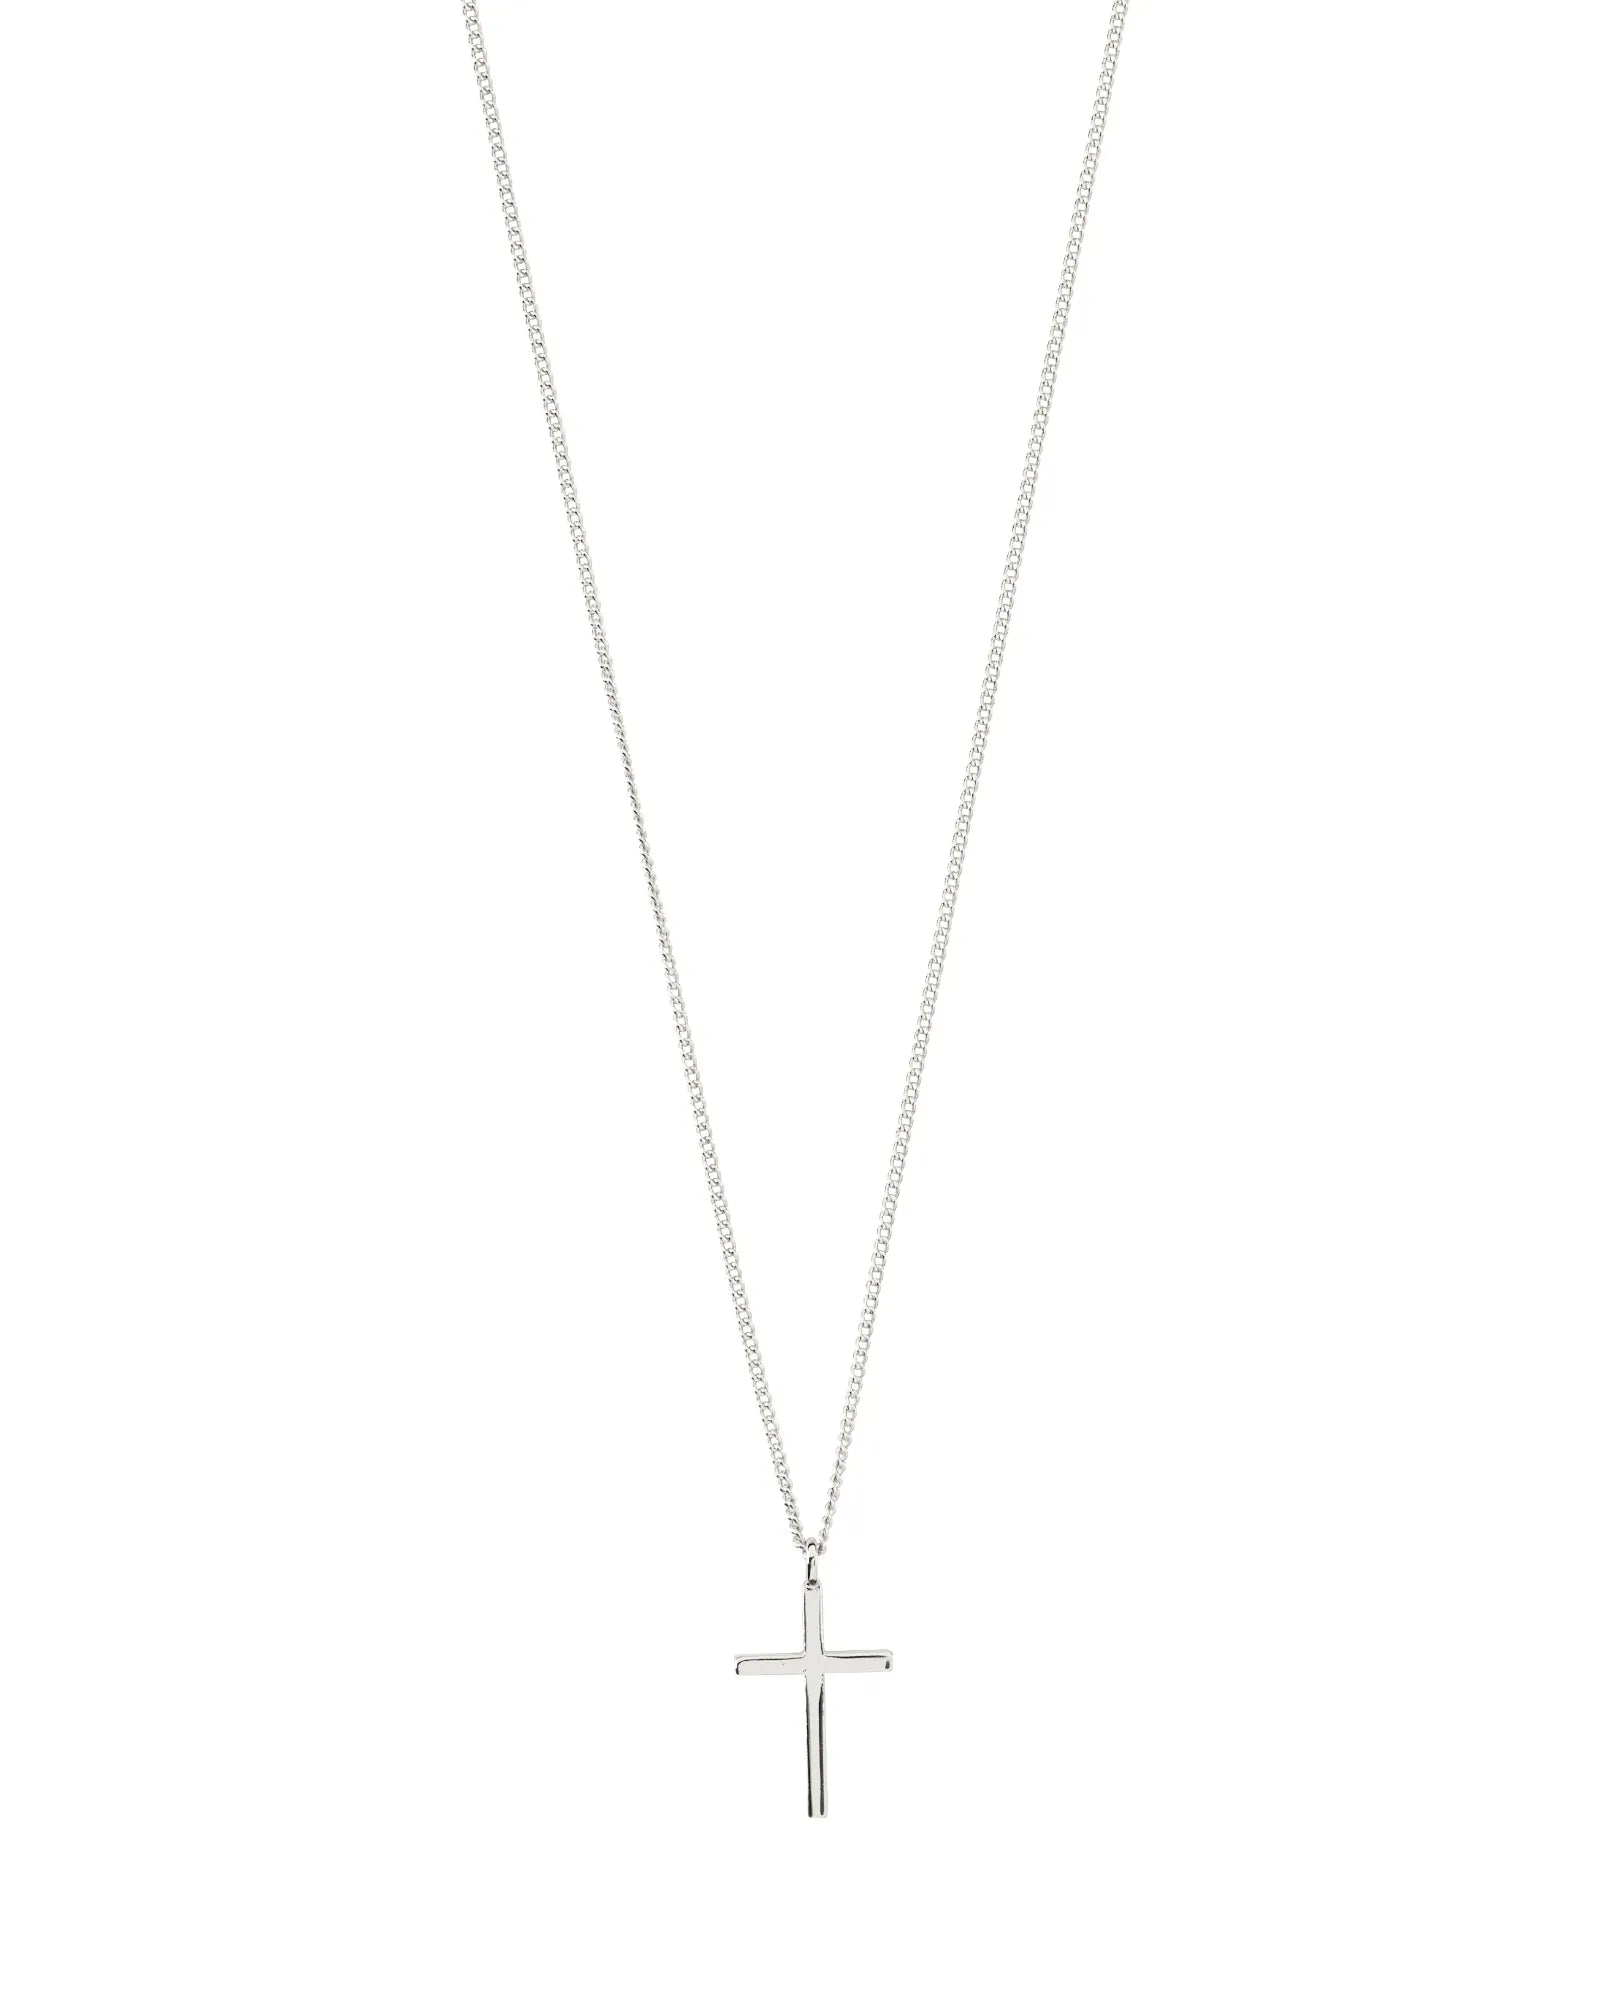 DAISY Recycled Cross Pendant Necklace - Silver Plated